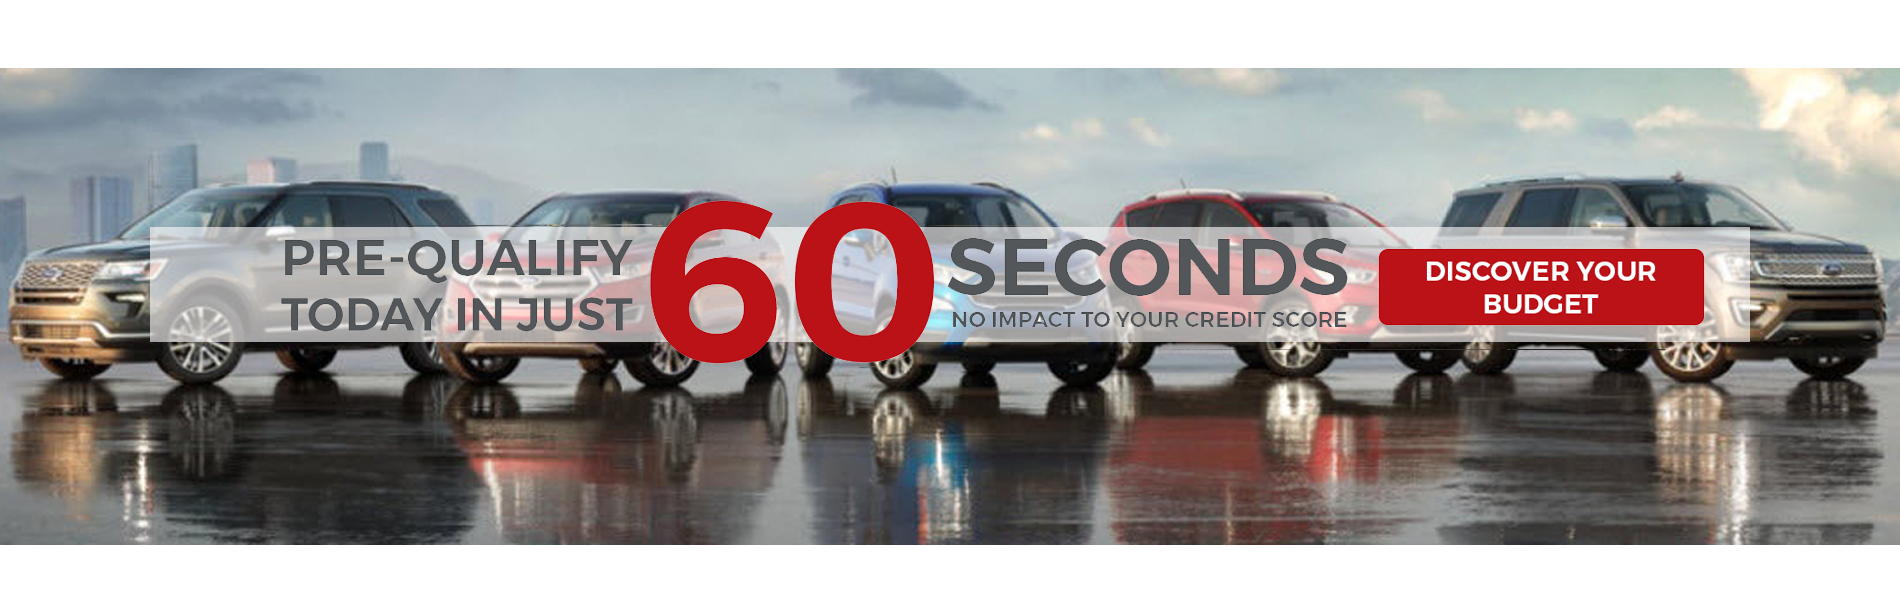 Discover your budget in 60 seconds